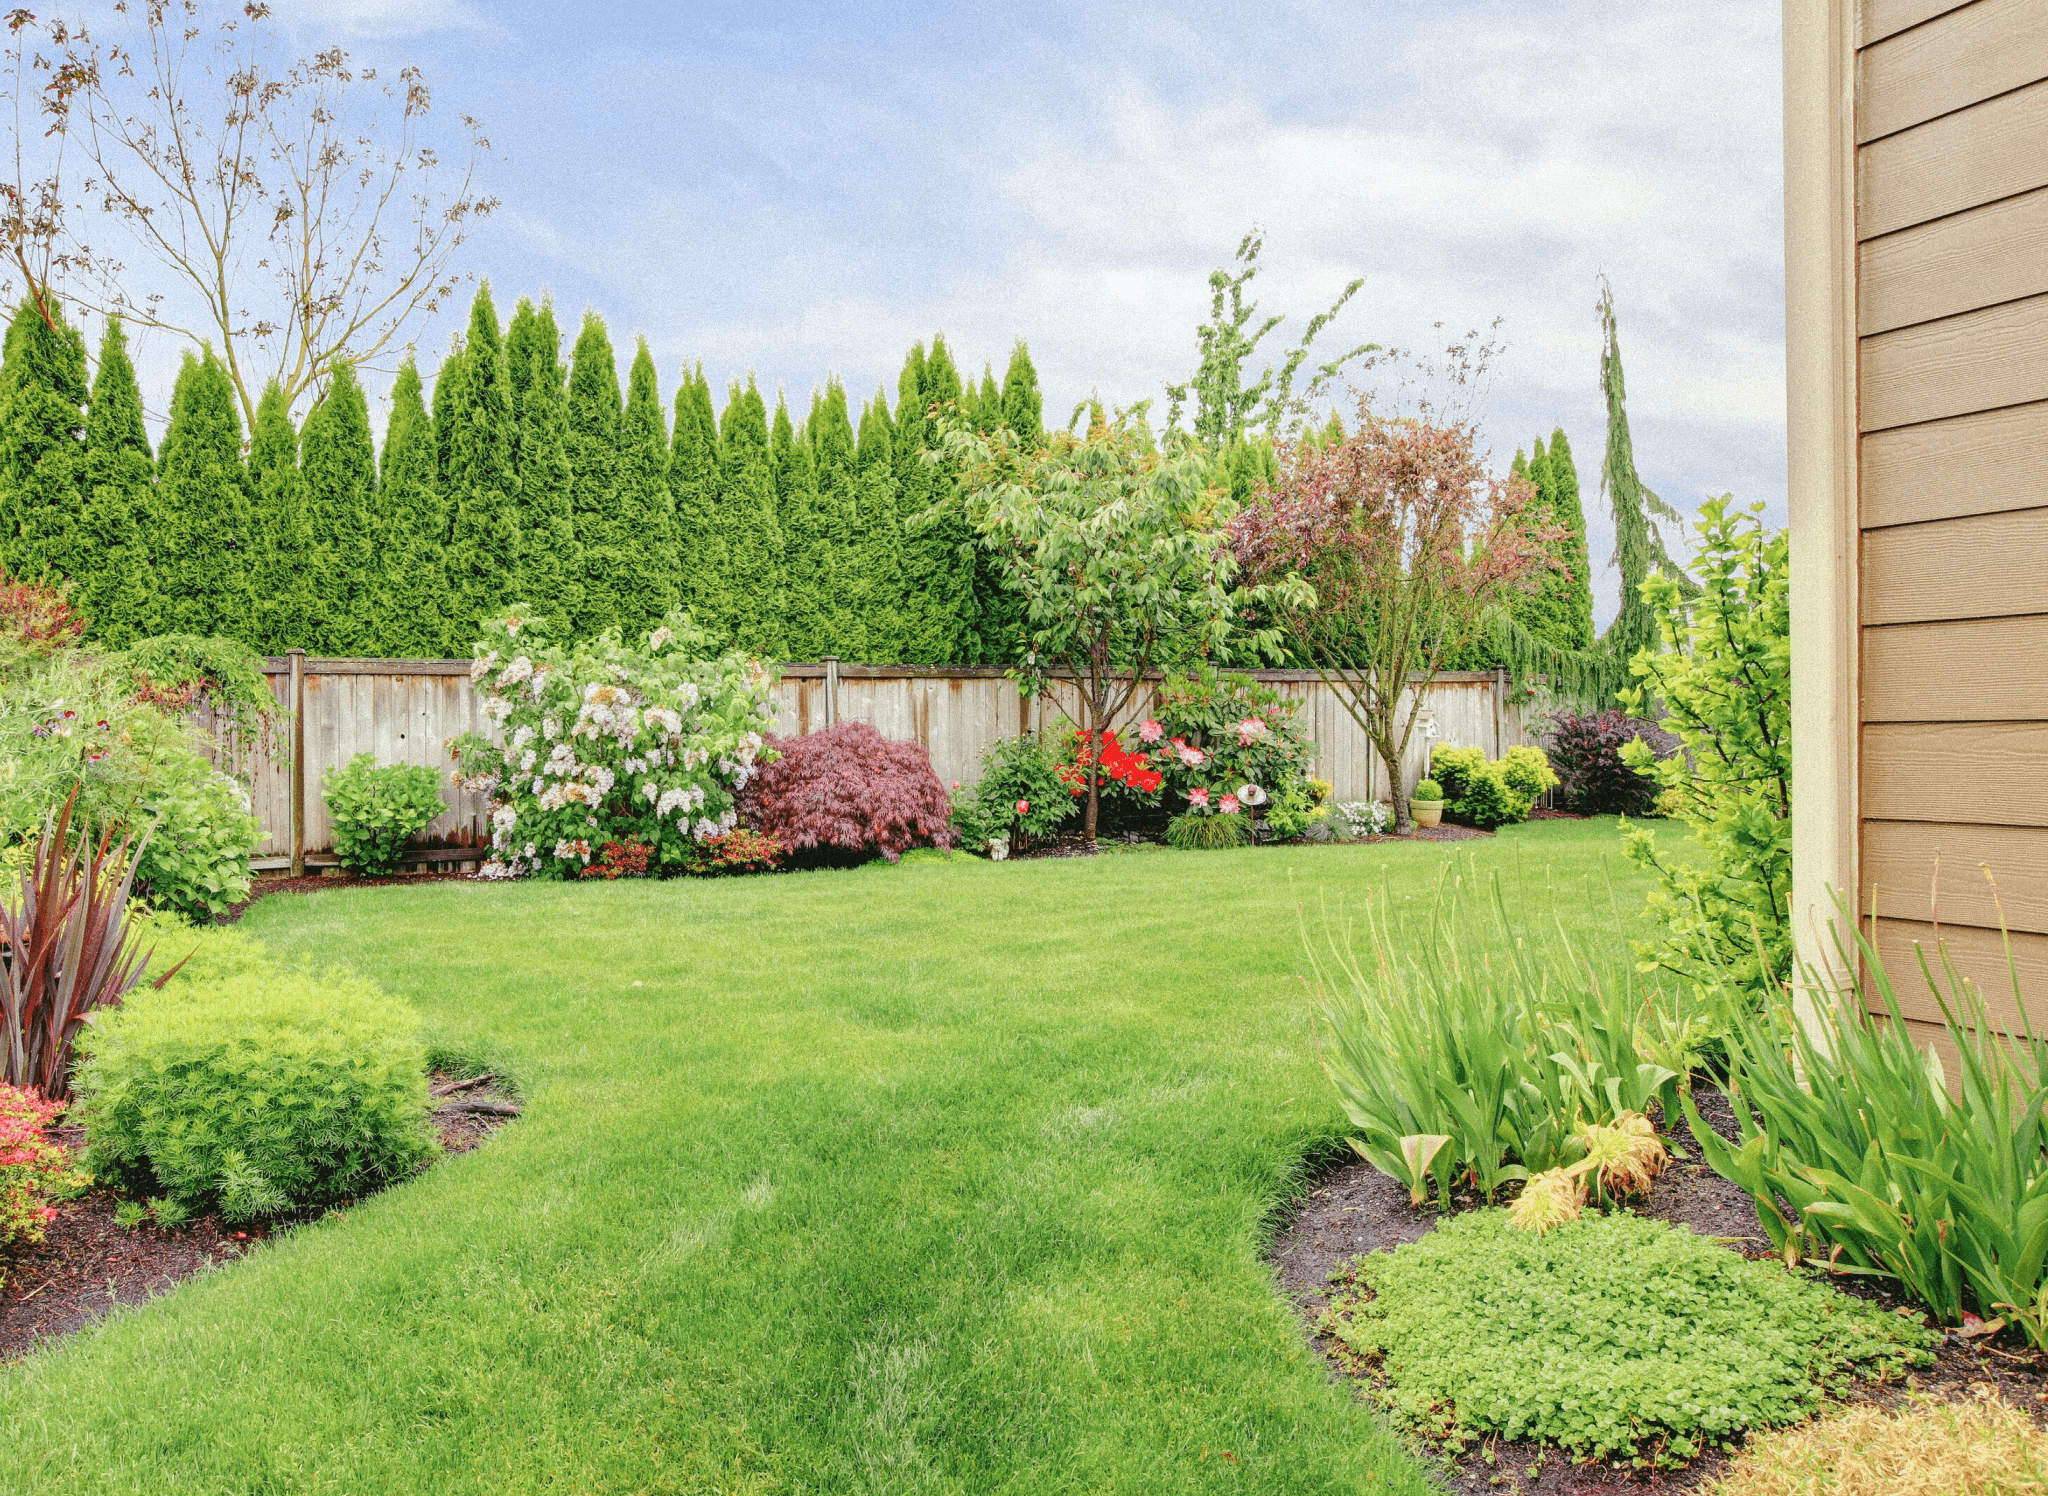 How Much Does It Cost To Get Your Garden Landscaped - Garden Likes